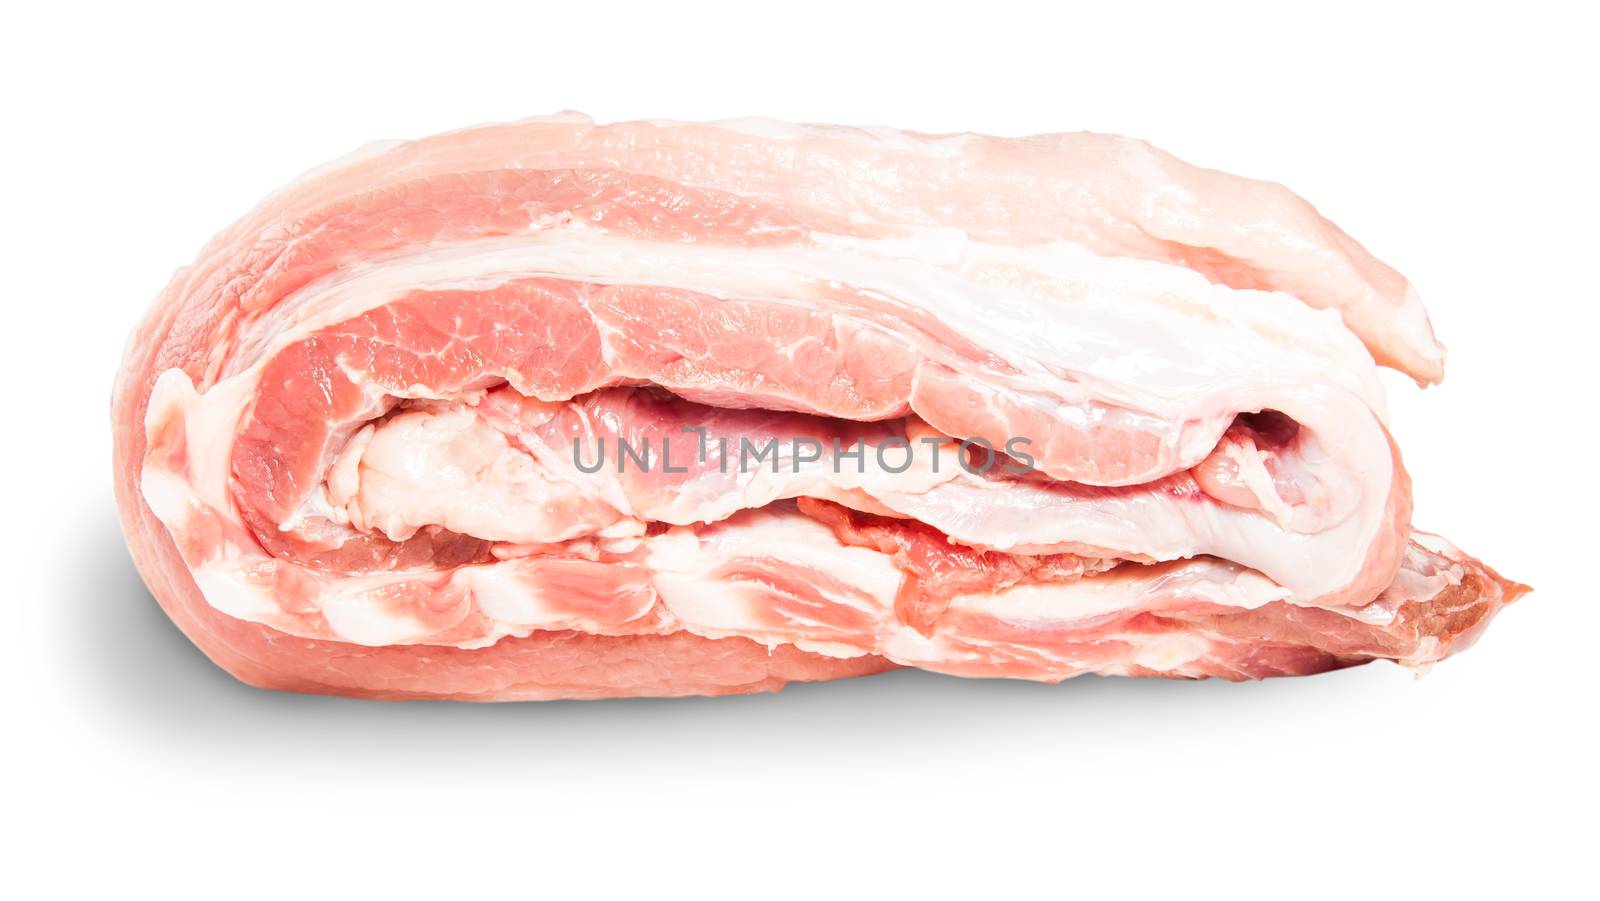 Raw Pork Ribs On A Roll Lying On Its Side by Cipariss